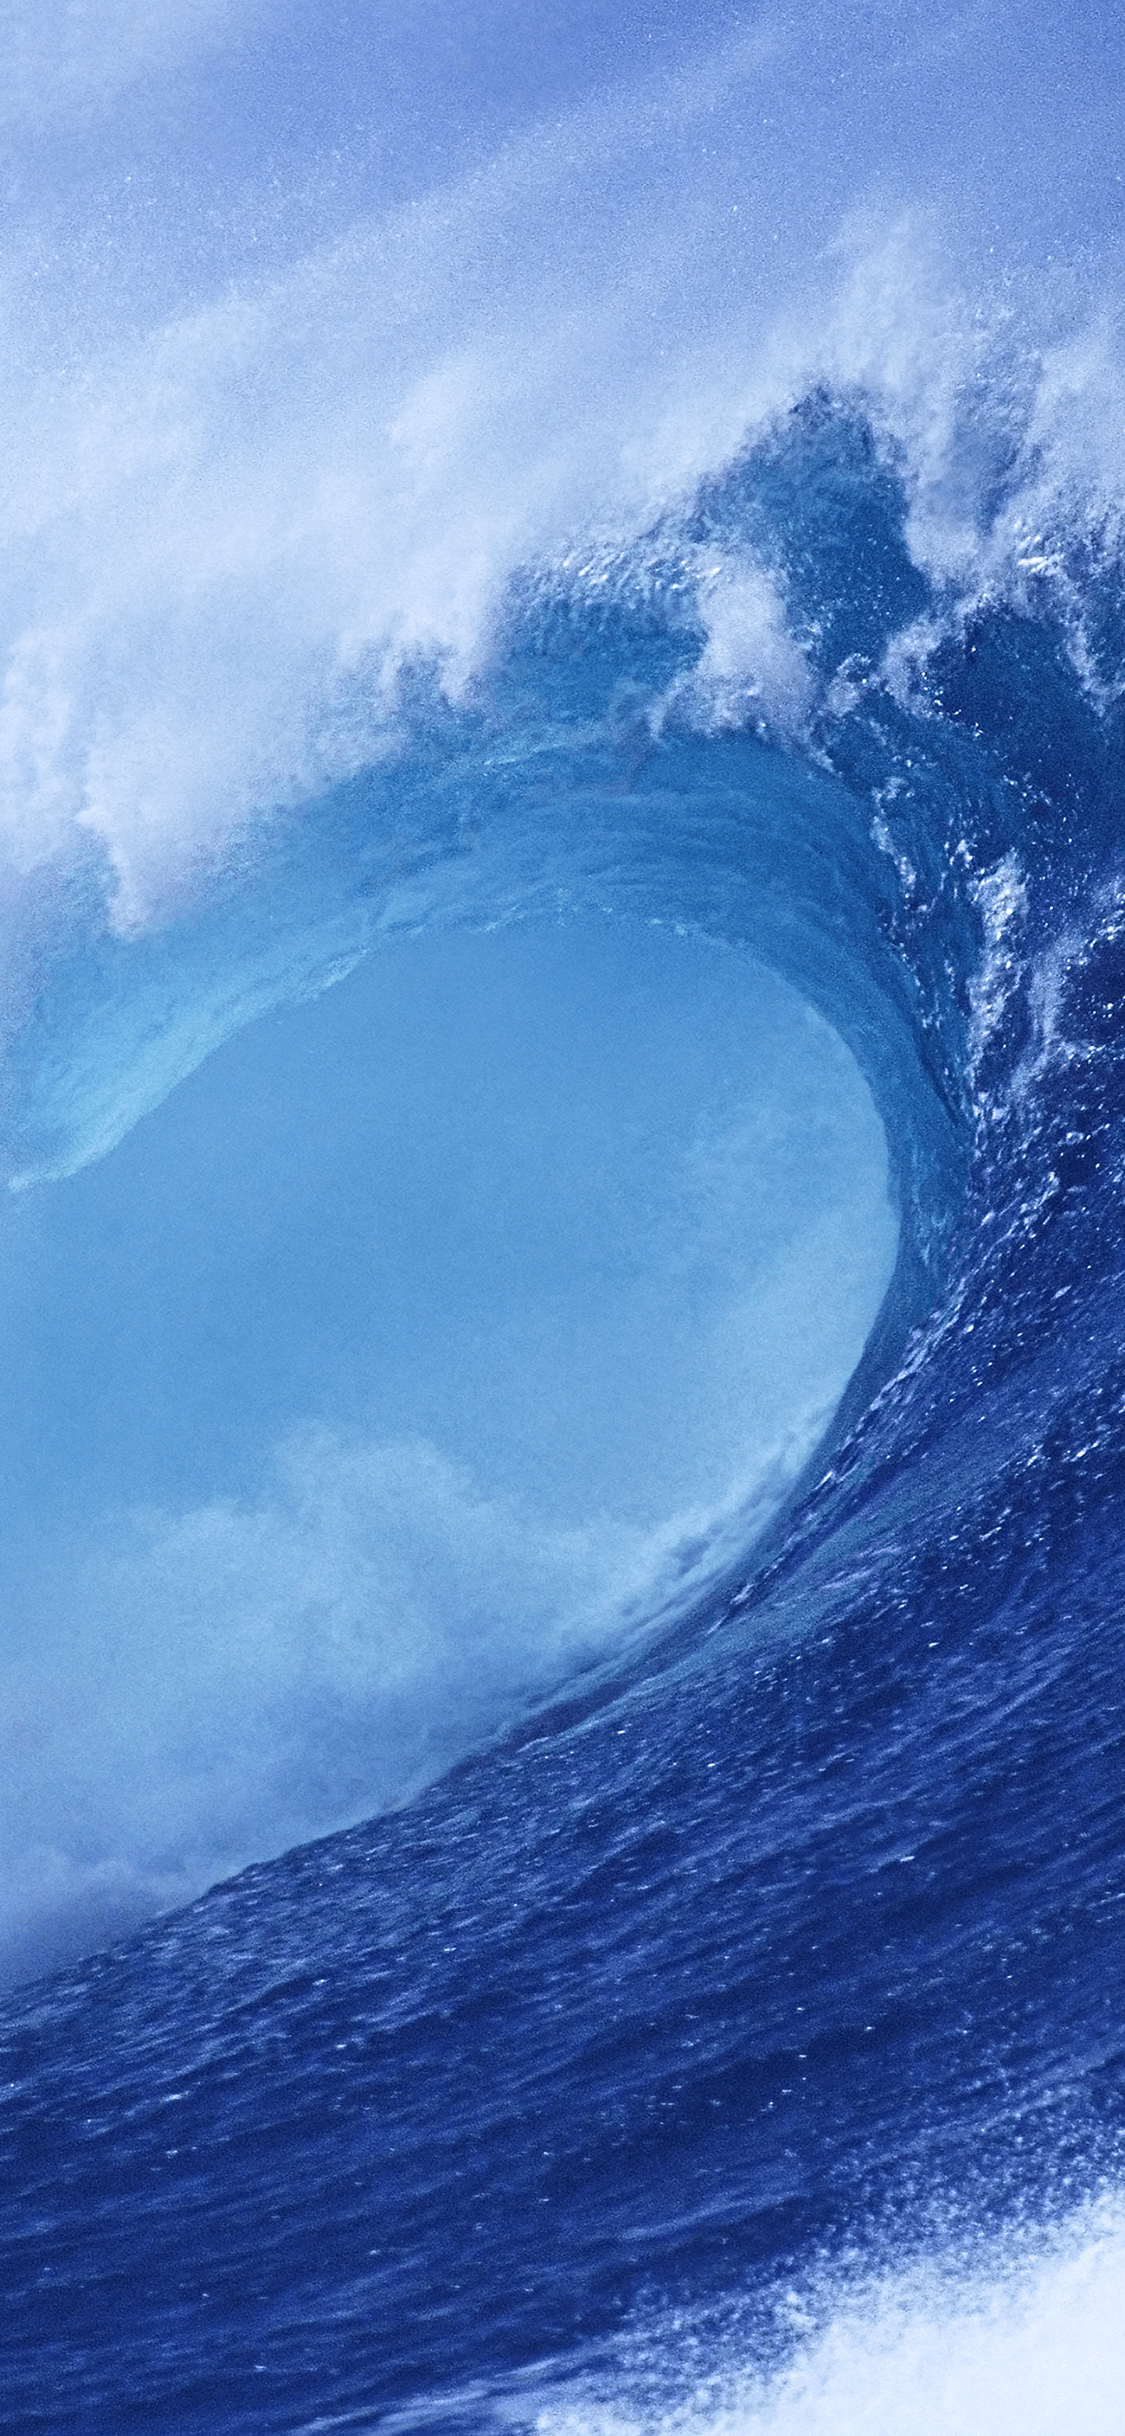 Wallpaper of a wave tube